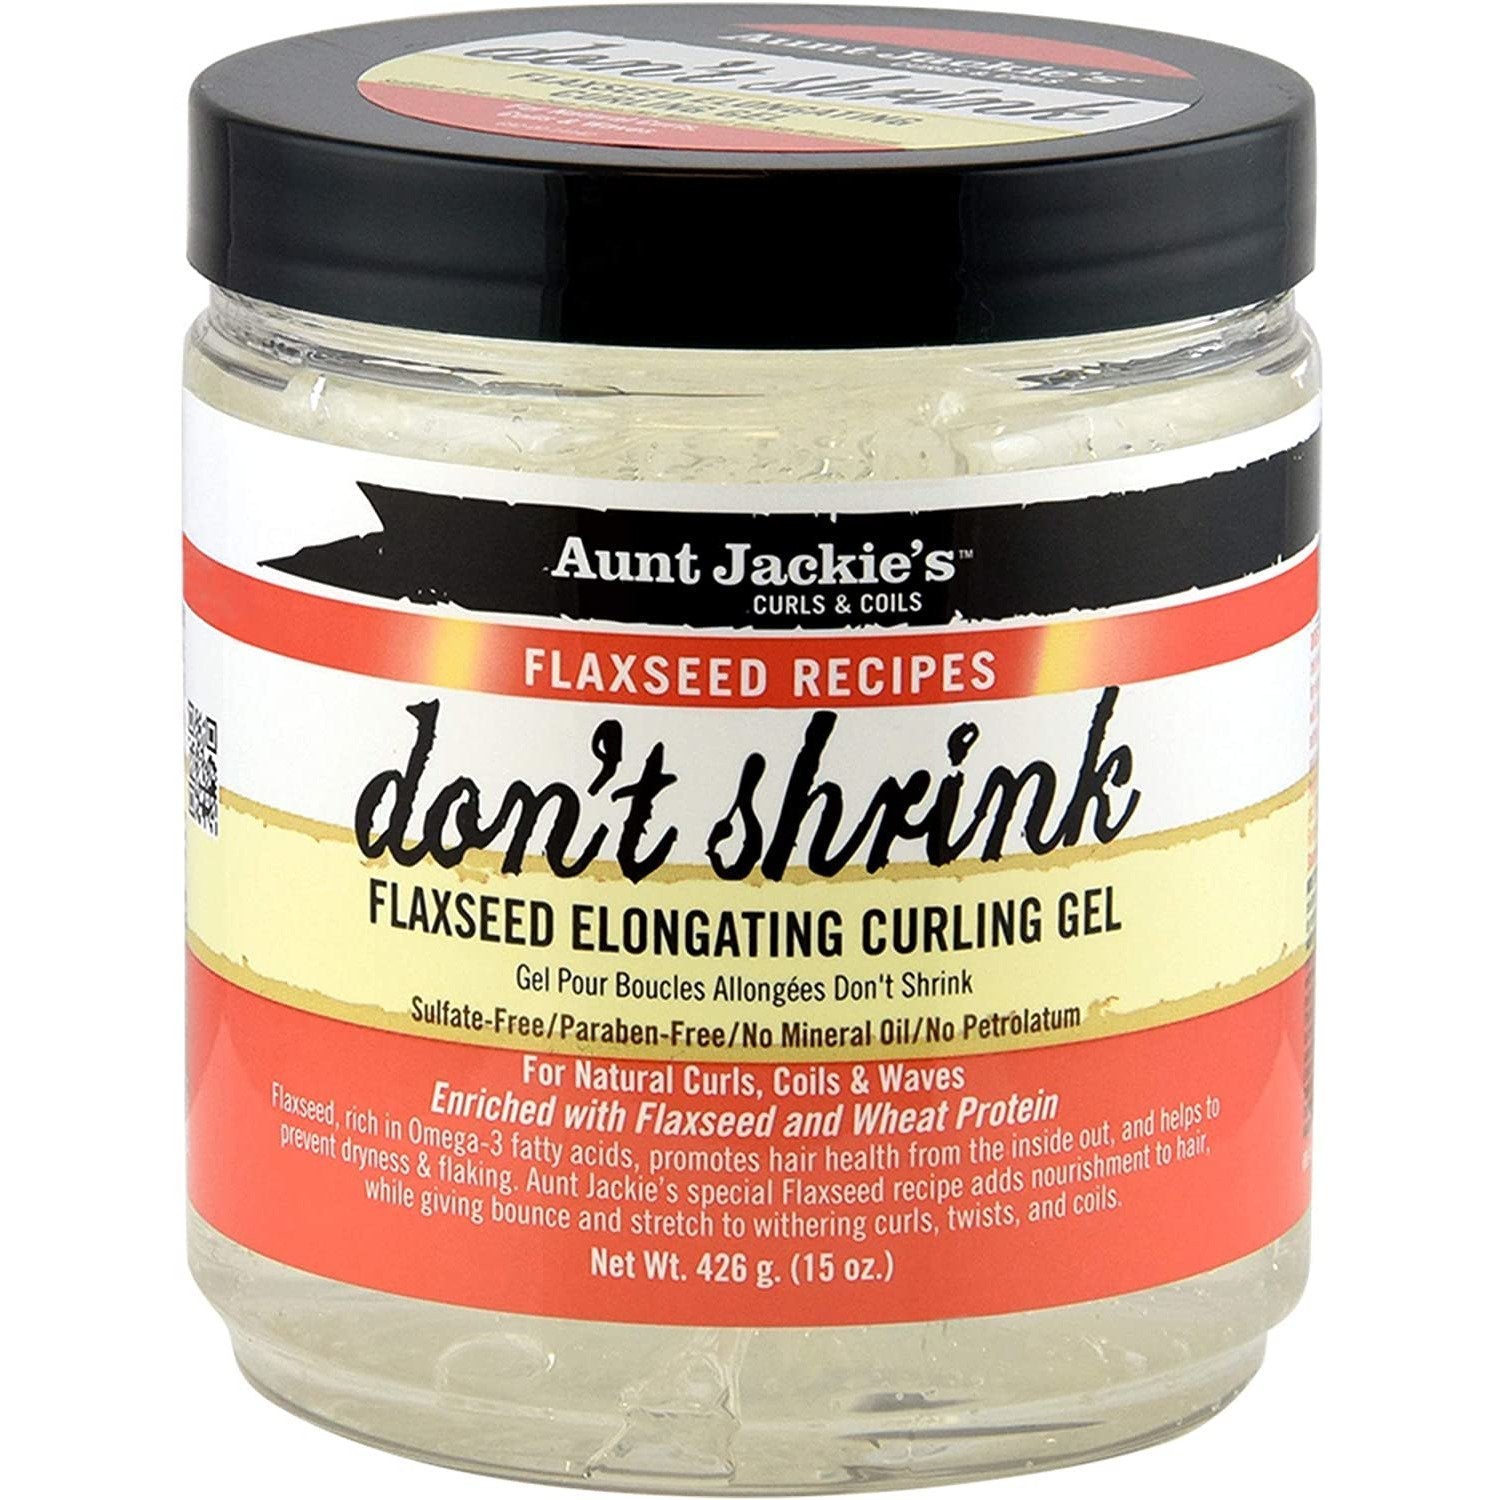 AUNT JACKIE'S "DON'T SHRINK" ELONGATION GEL (15.oz) Flaxseed Recipes-Aunt Jackie's- Hive Beauty Supply